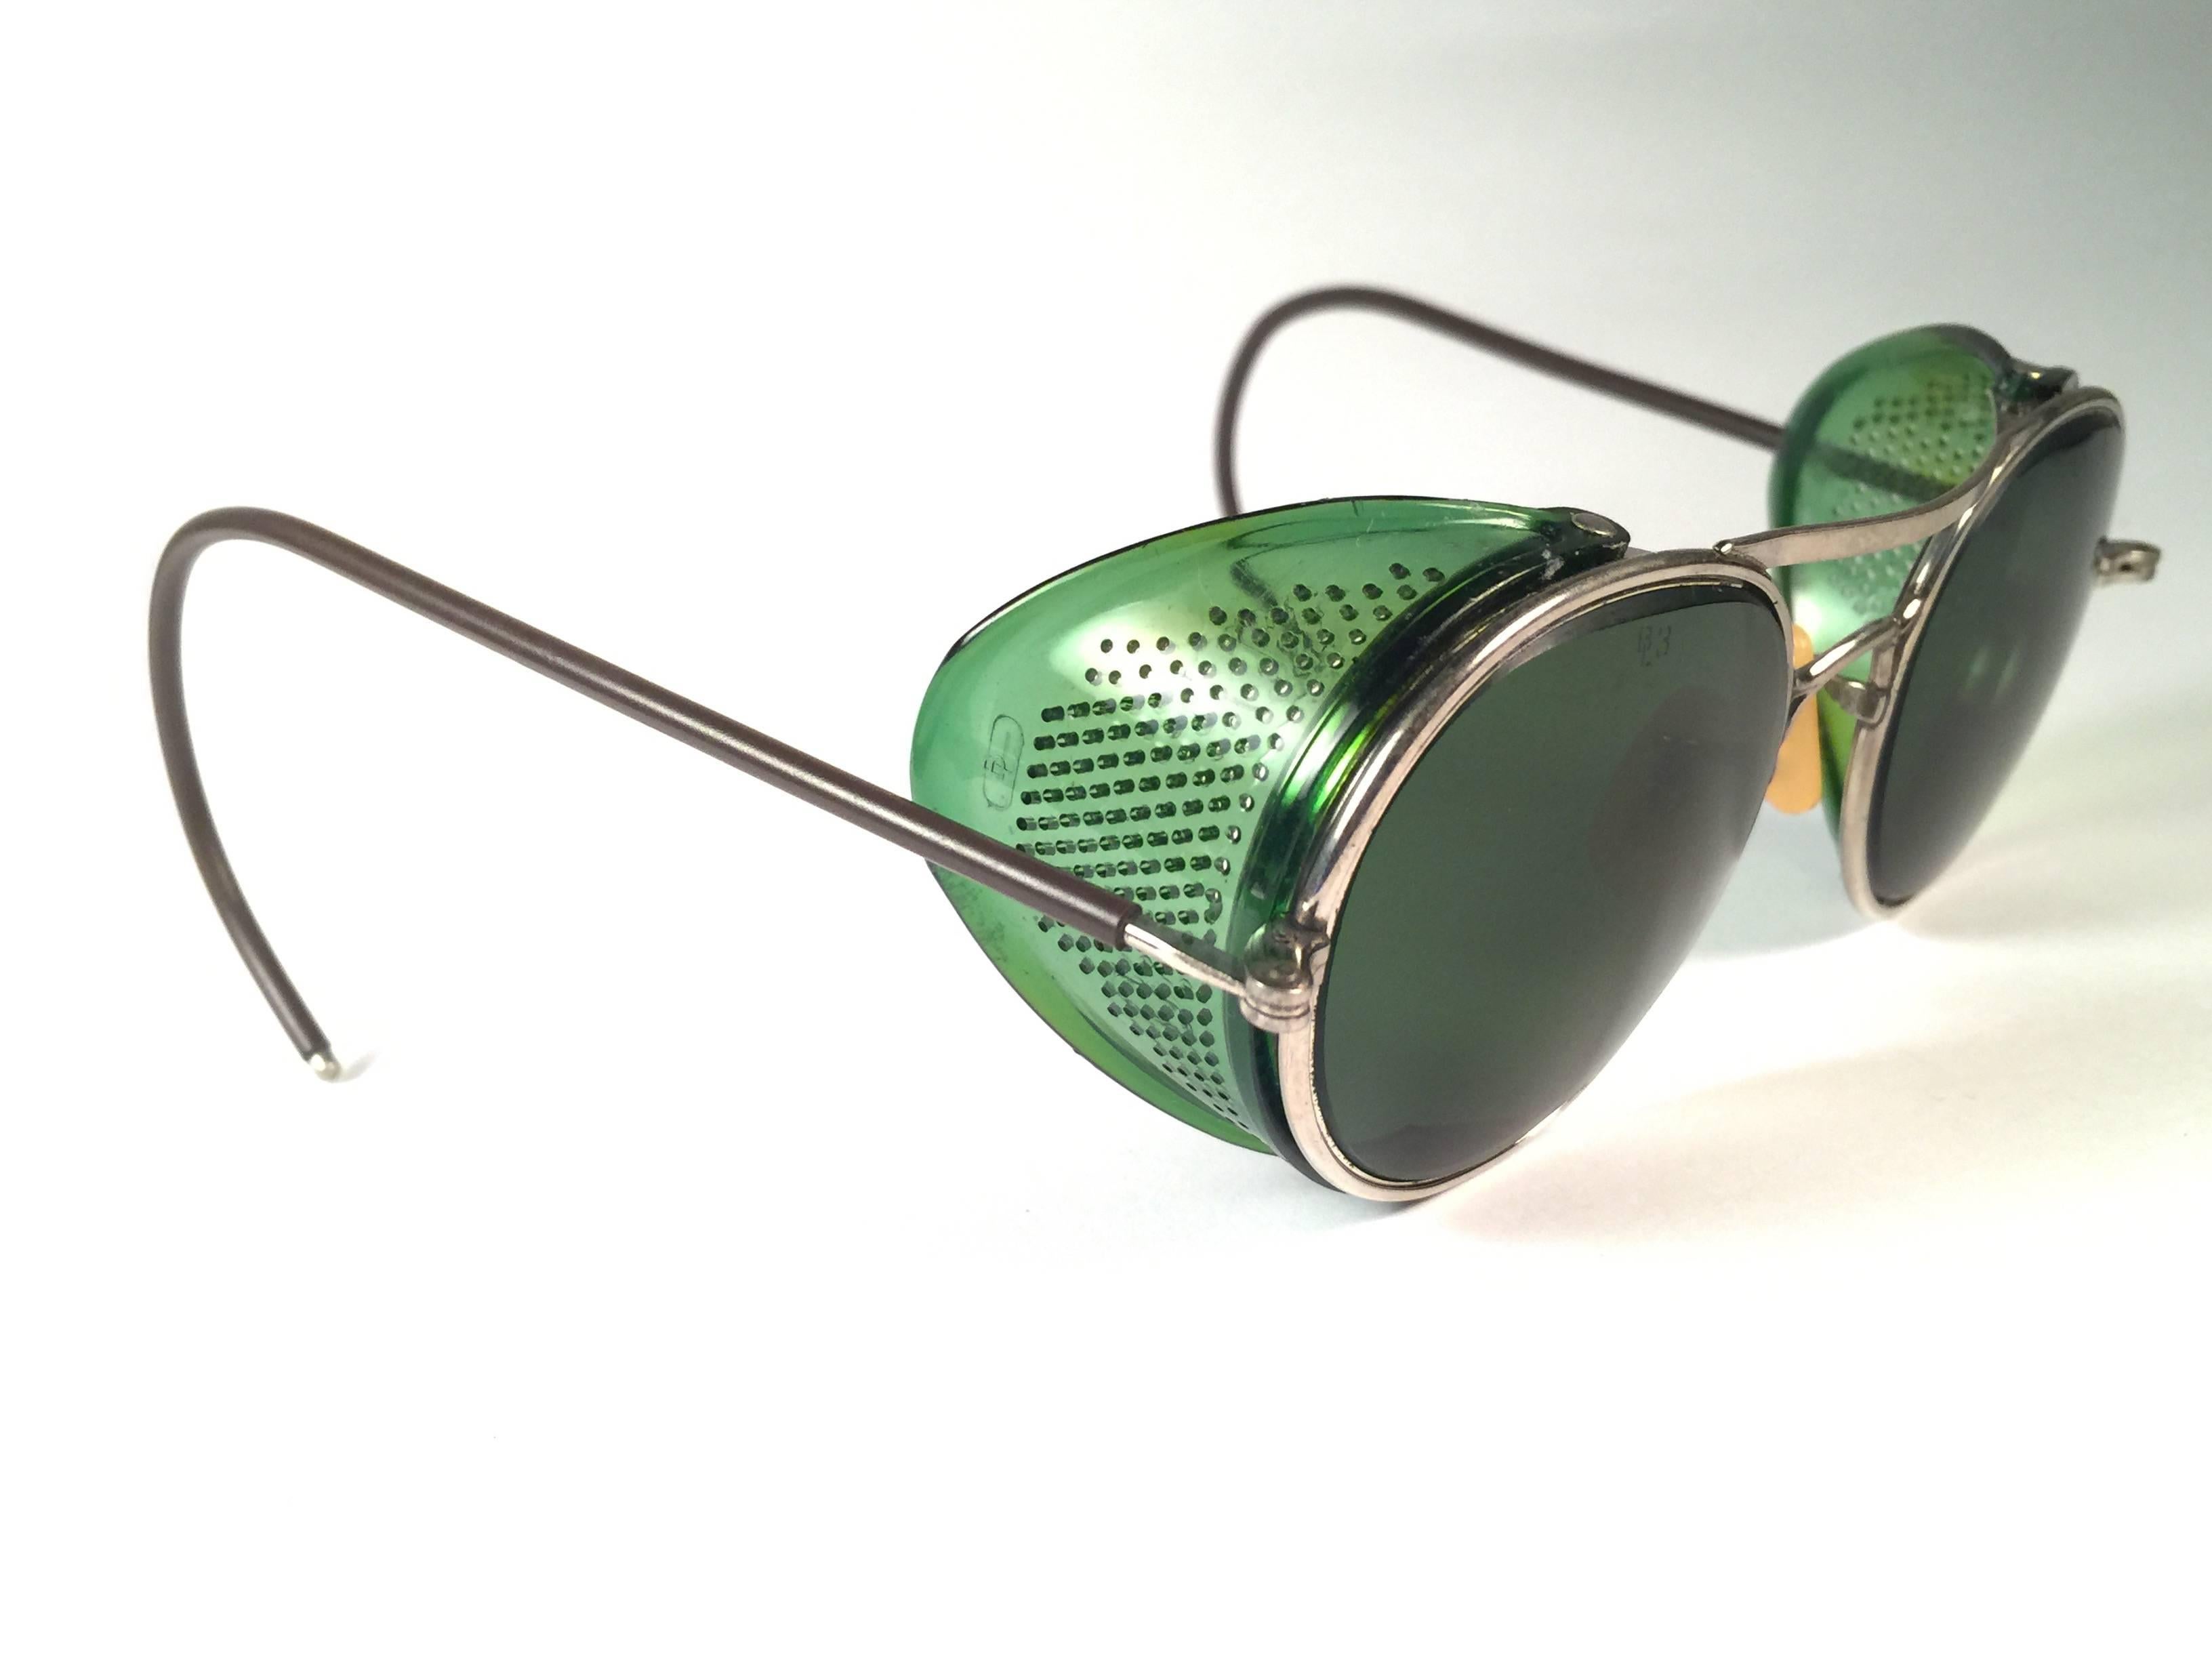 Superb Item! 1950's Bausch & Lomb Safety Goggles.  
Folding green and silver metal side cups and special wrapped temples.  Mint true green round lenses with light wear on them. 
Please note that this item is nearly 70 years old and has some